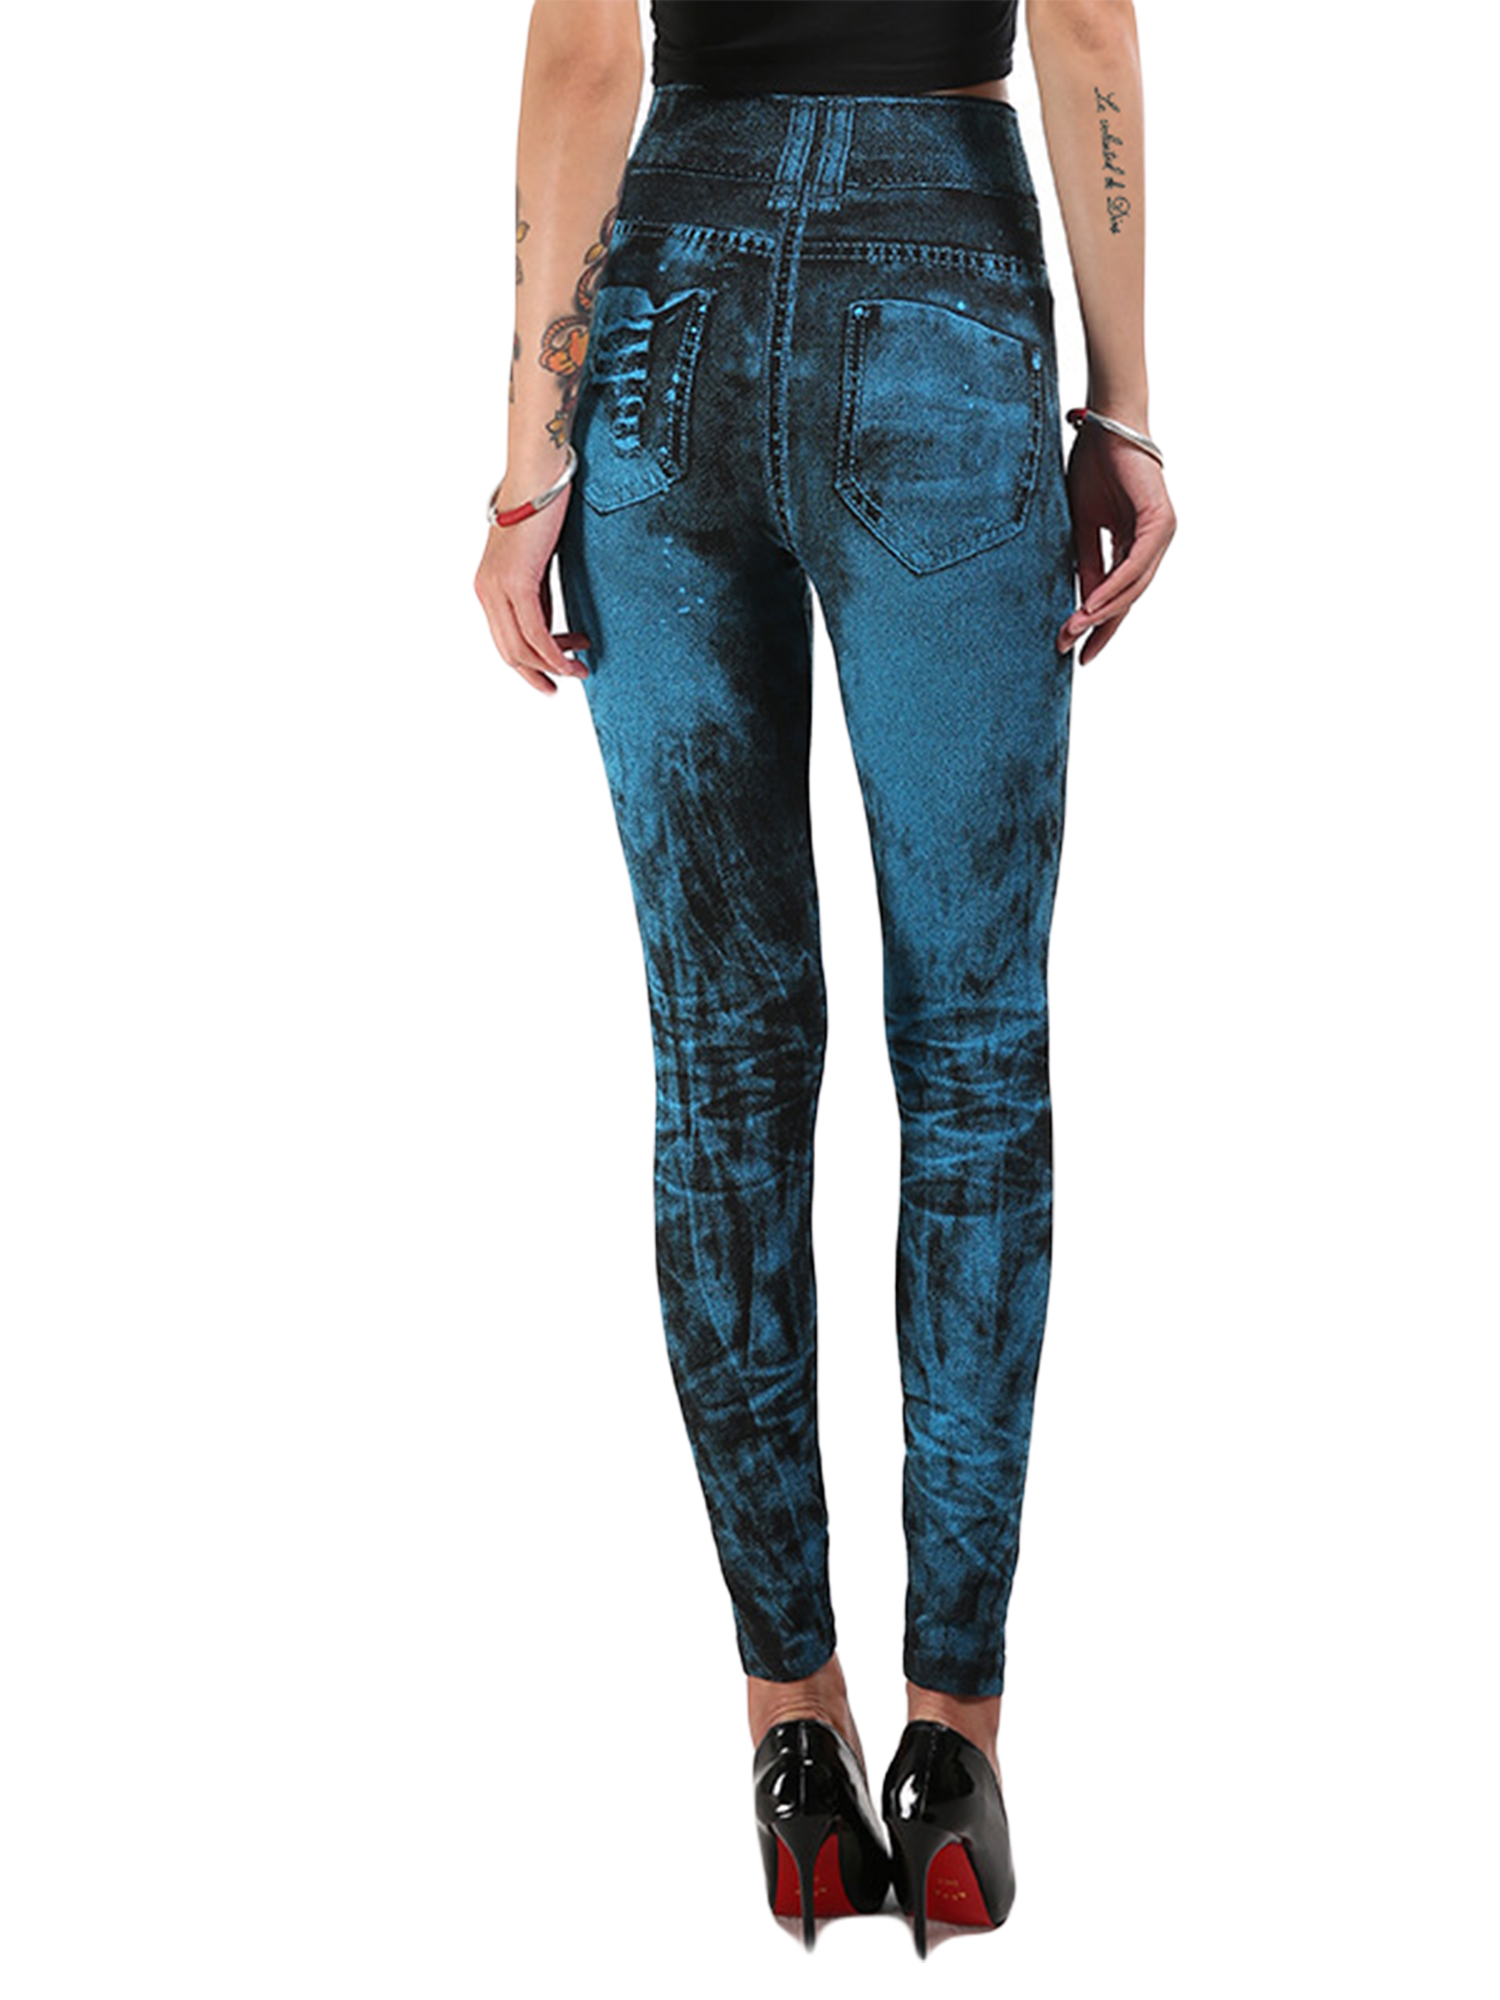 Ladies Skinny Jeans Stretch Jeans High Waisted Leggings Denim Print Distressed Jeans For Women Seamless Full Length Pencil Pants - image 4 of 4